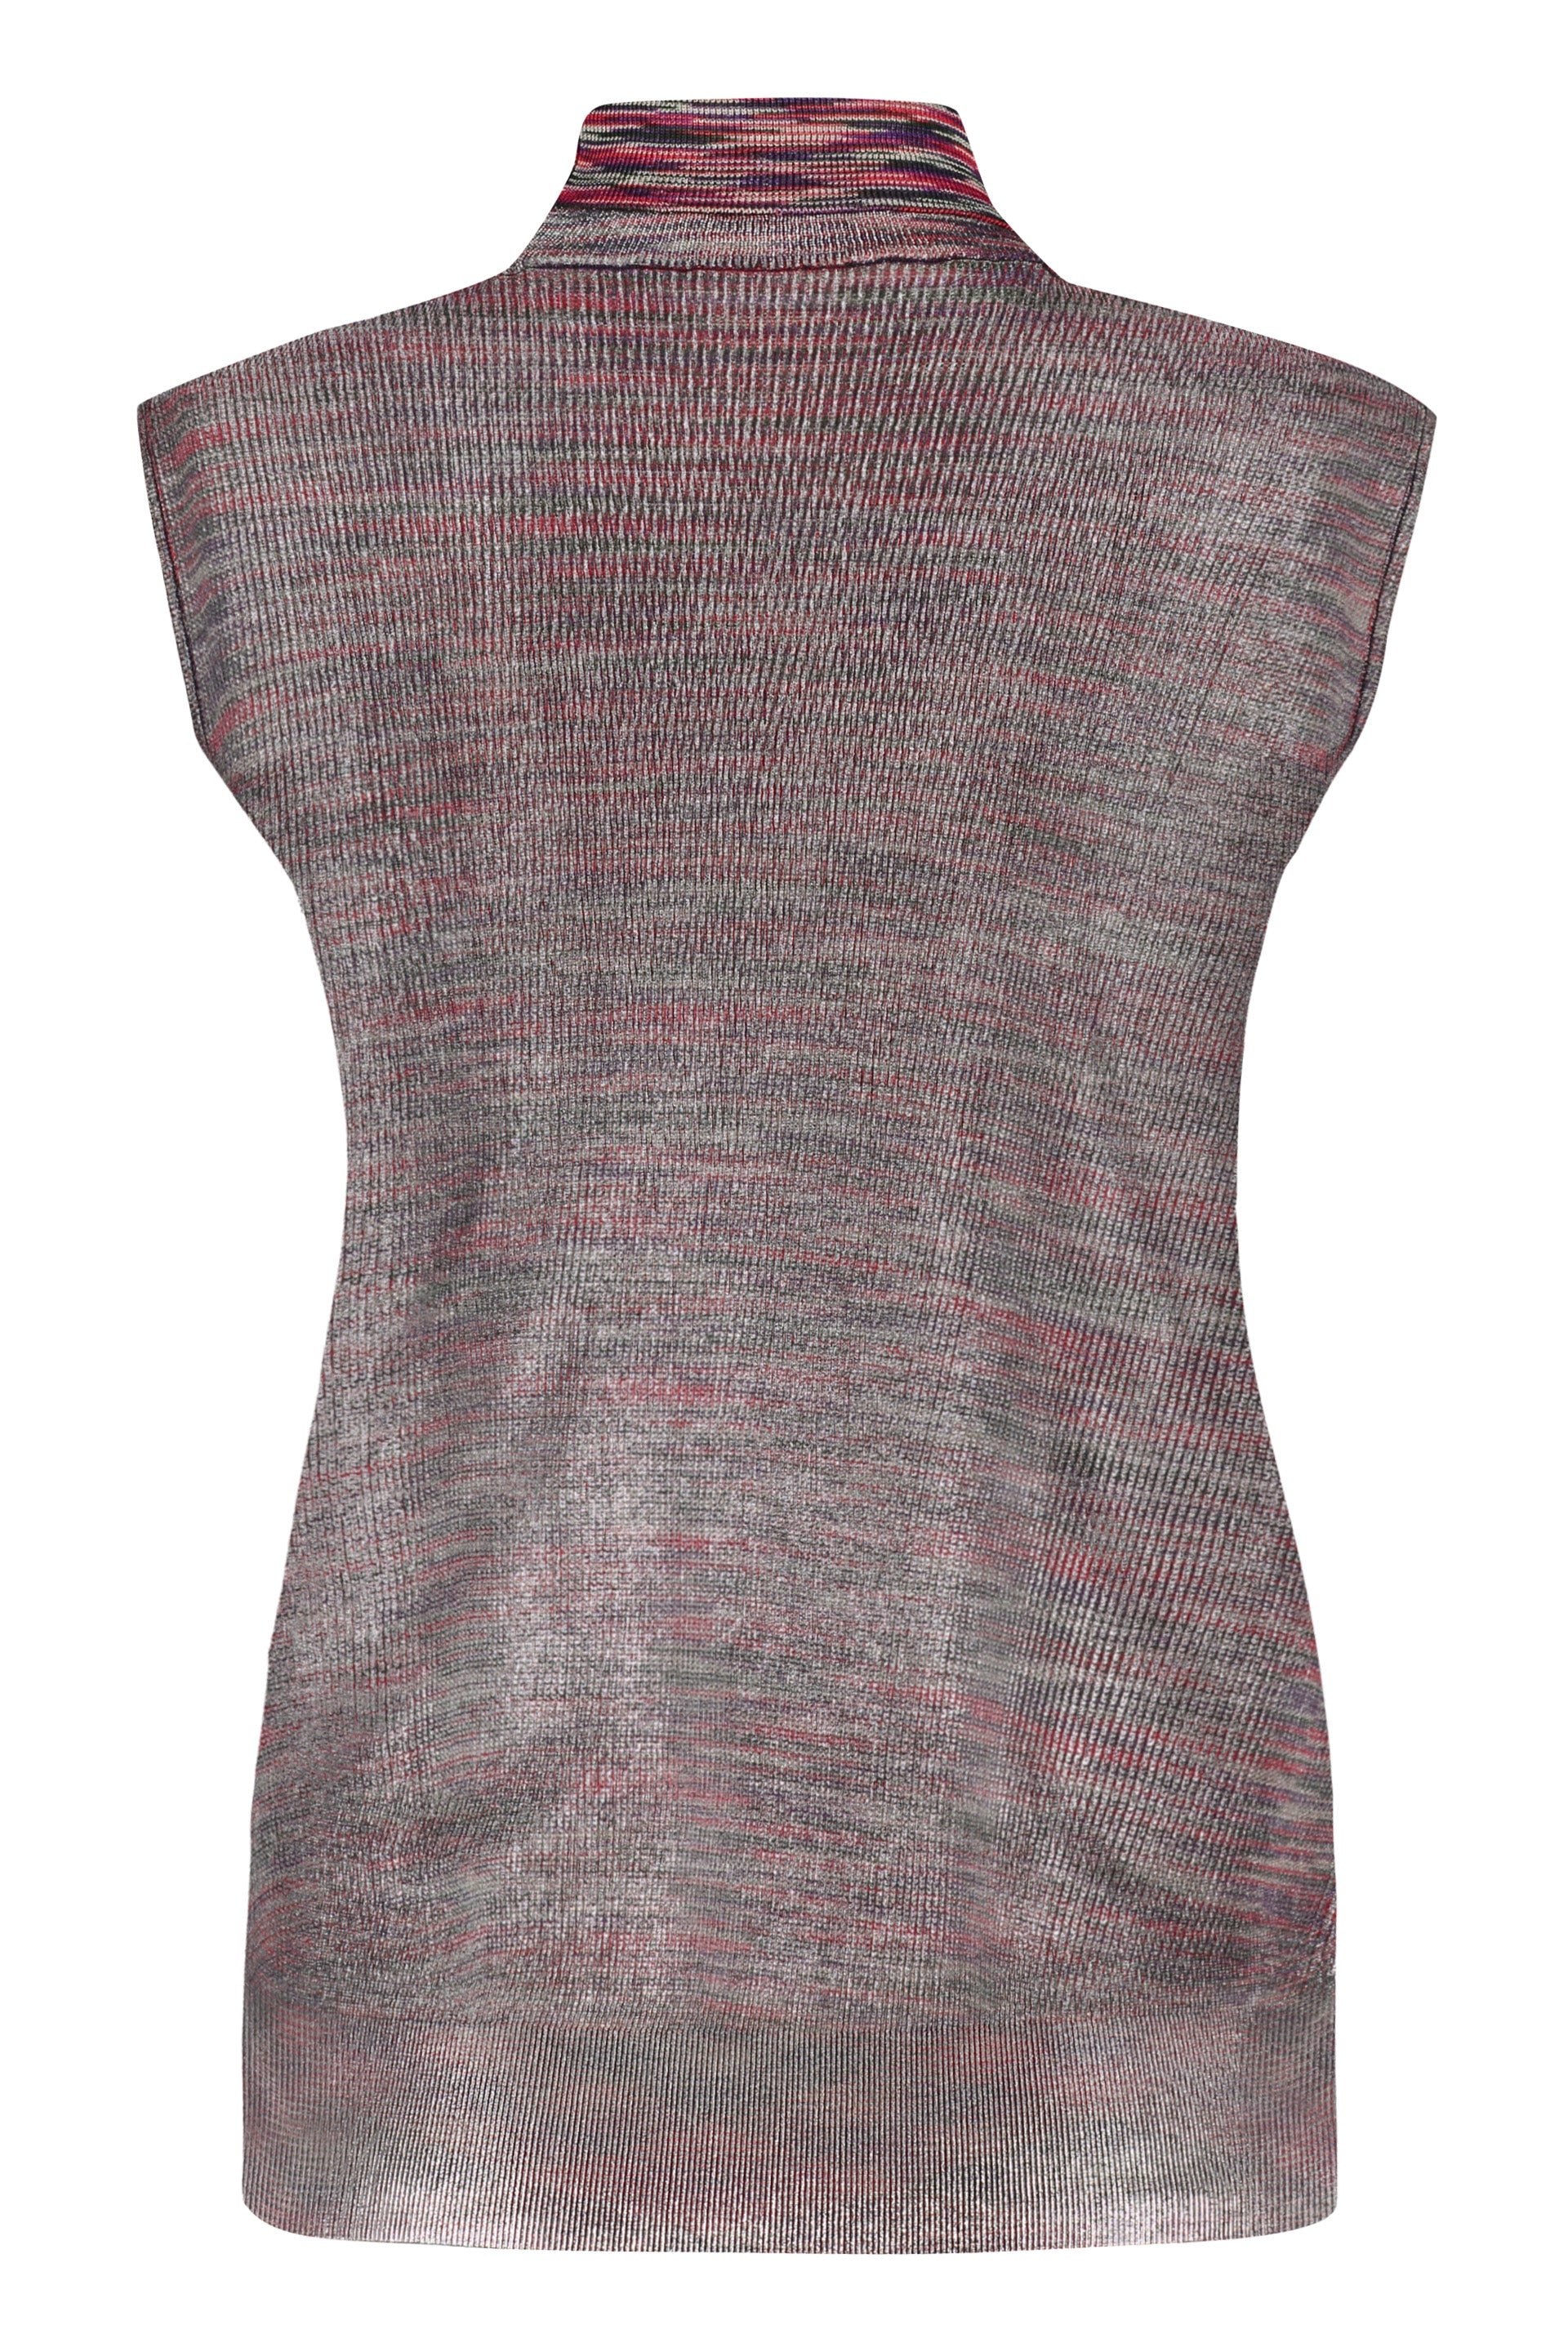 Missoni-OUTLET-SALE-Sleeveless-top-Shirts-ARCHIVE-COLLECTION-2_6b397172-675d-4cf9-802e-1c637fabeac0.jpg